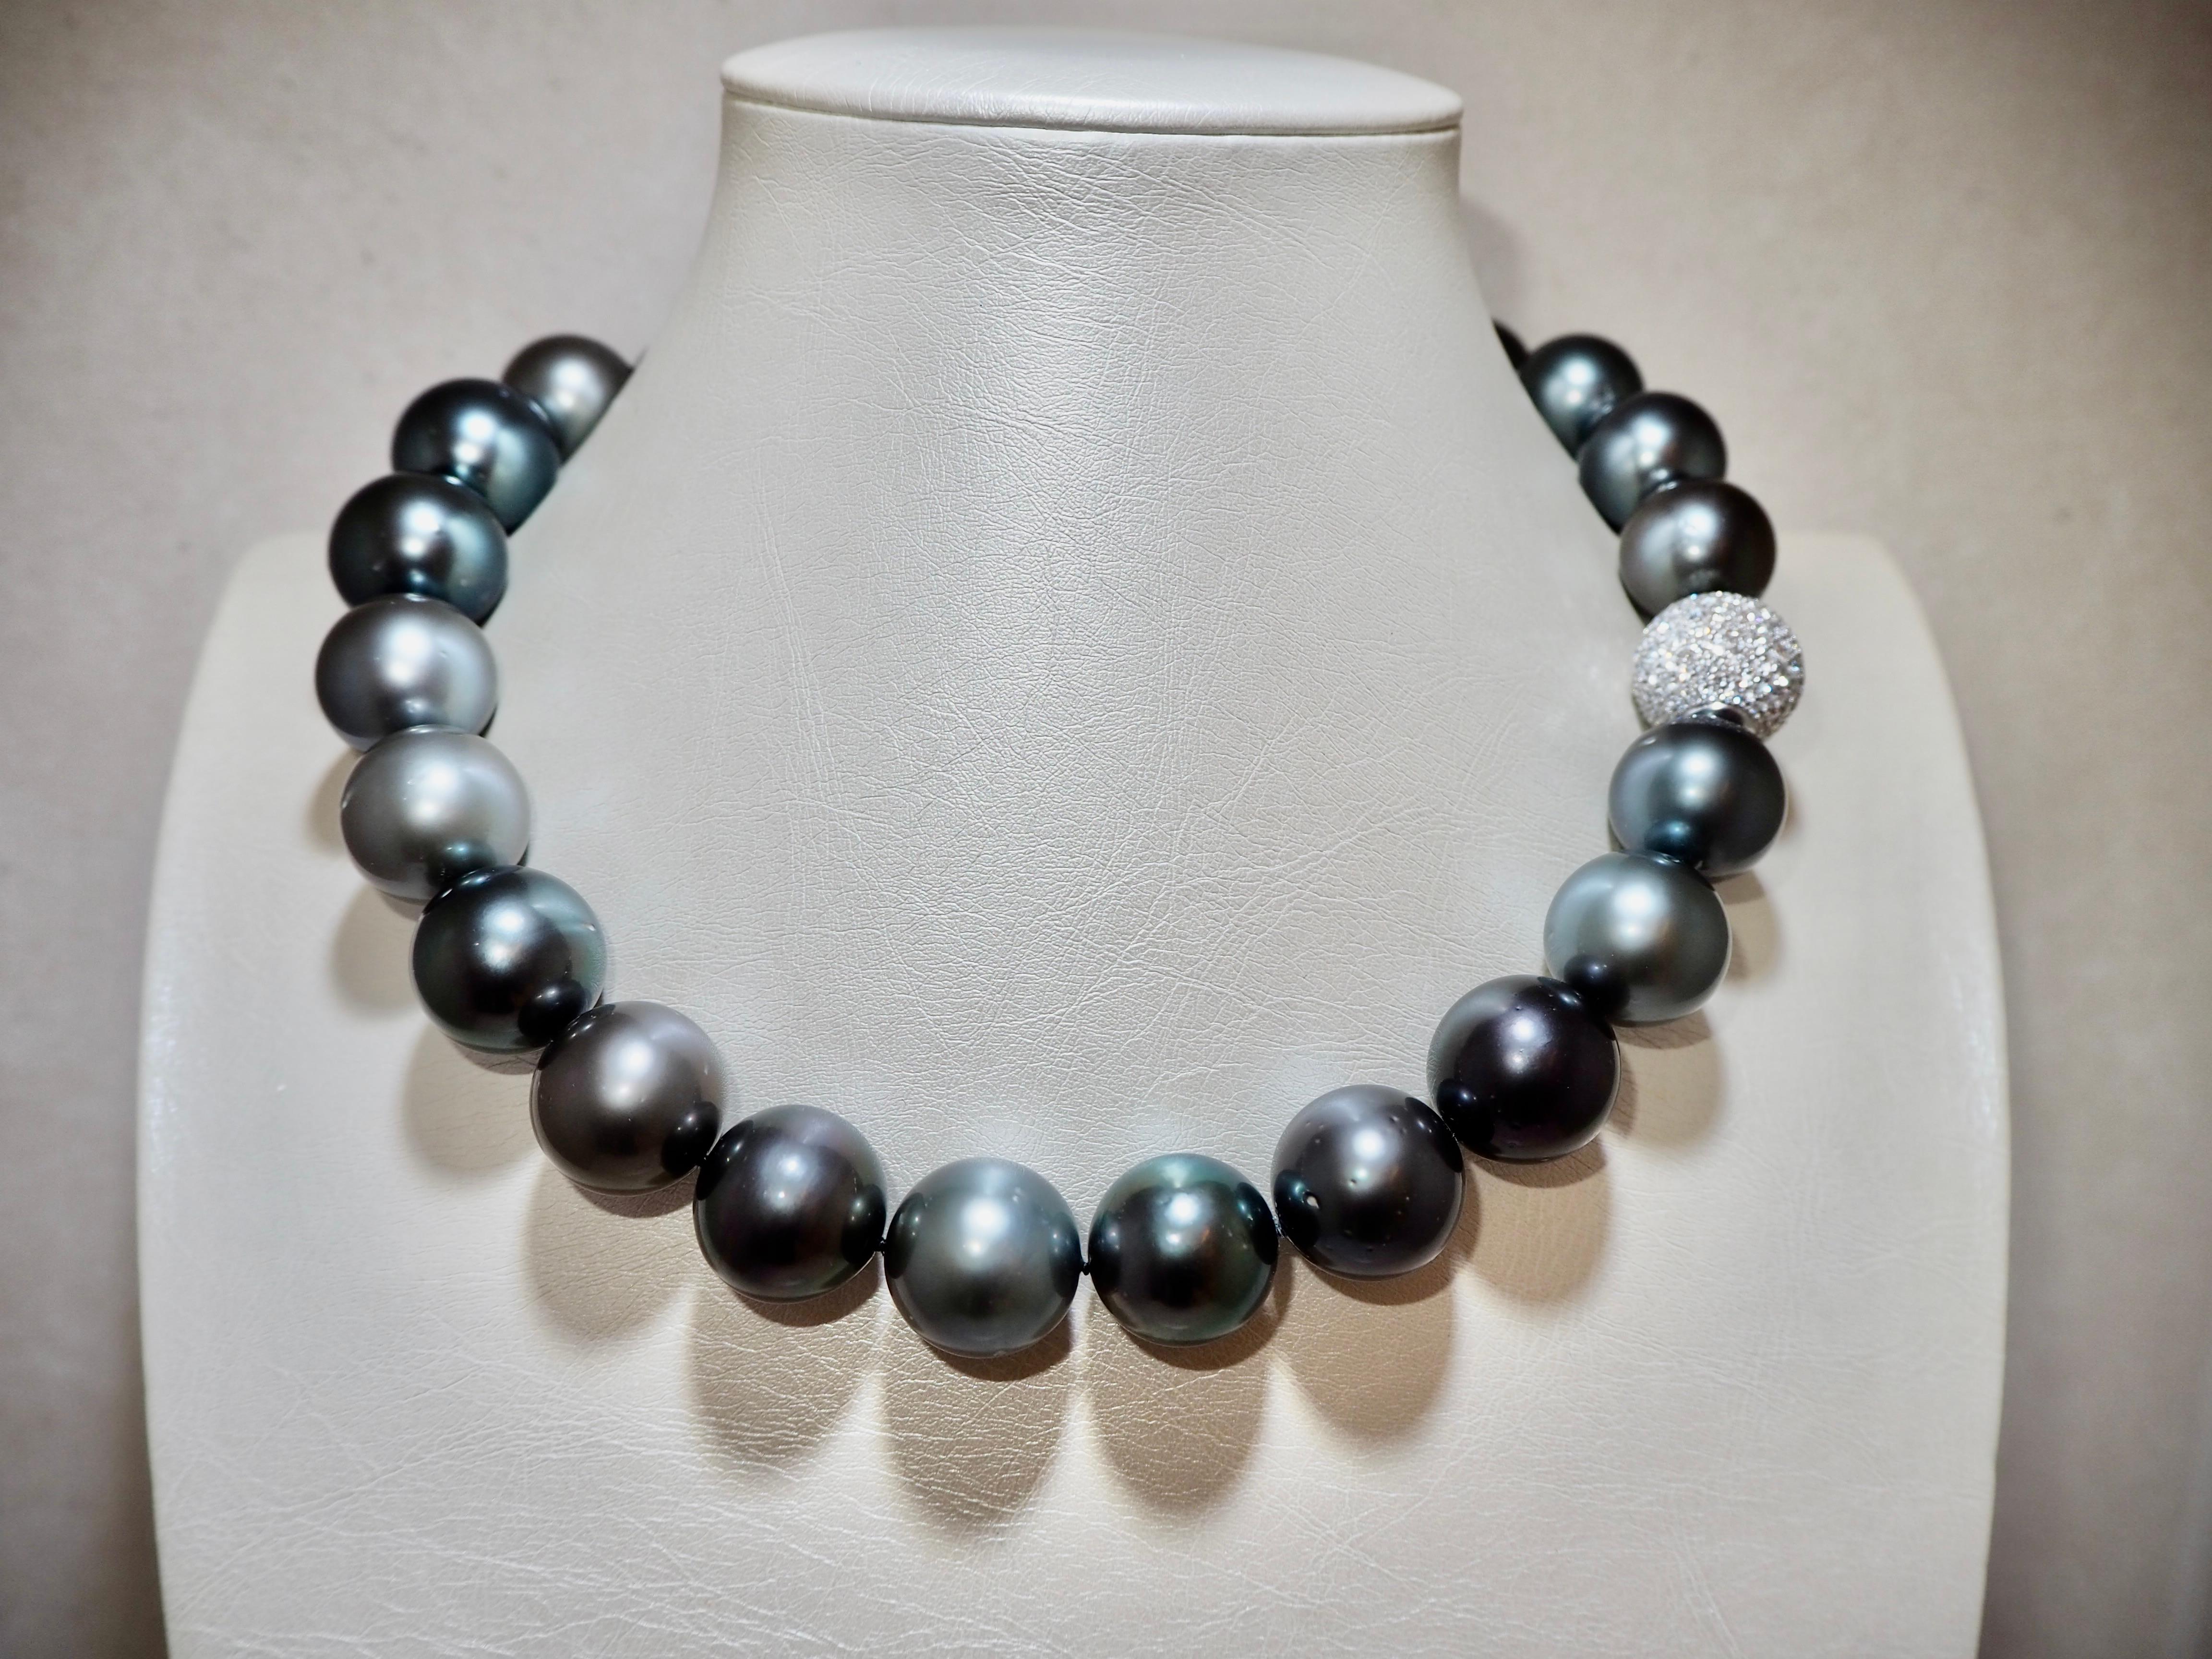 The Tahitian pearl necklace from French Polynesia consists of 24 pearls with diameters ranging from 18-20mm. The pearls are classified as AA, indicating that 80% of their surface is free of inclusions.

The necklace features a diamond clasp with